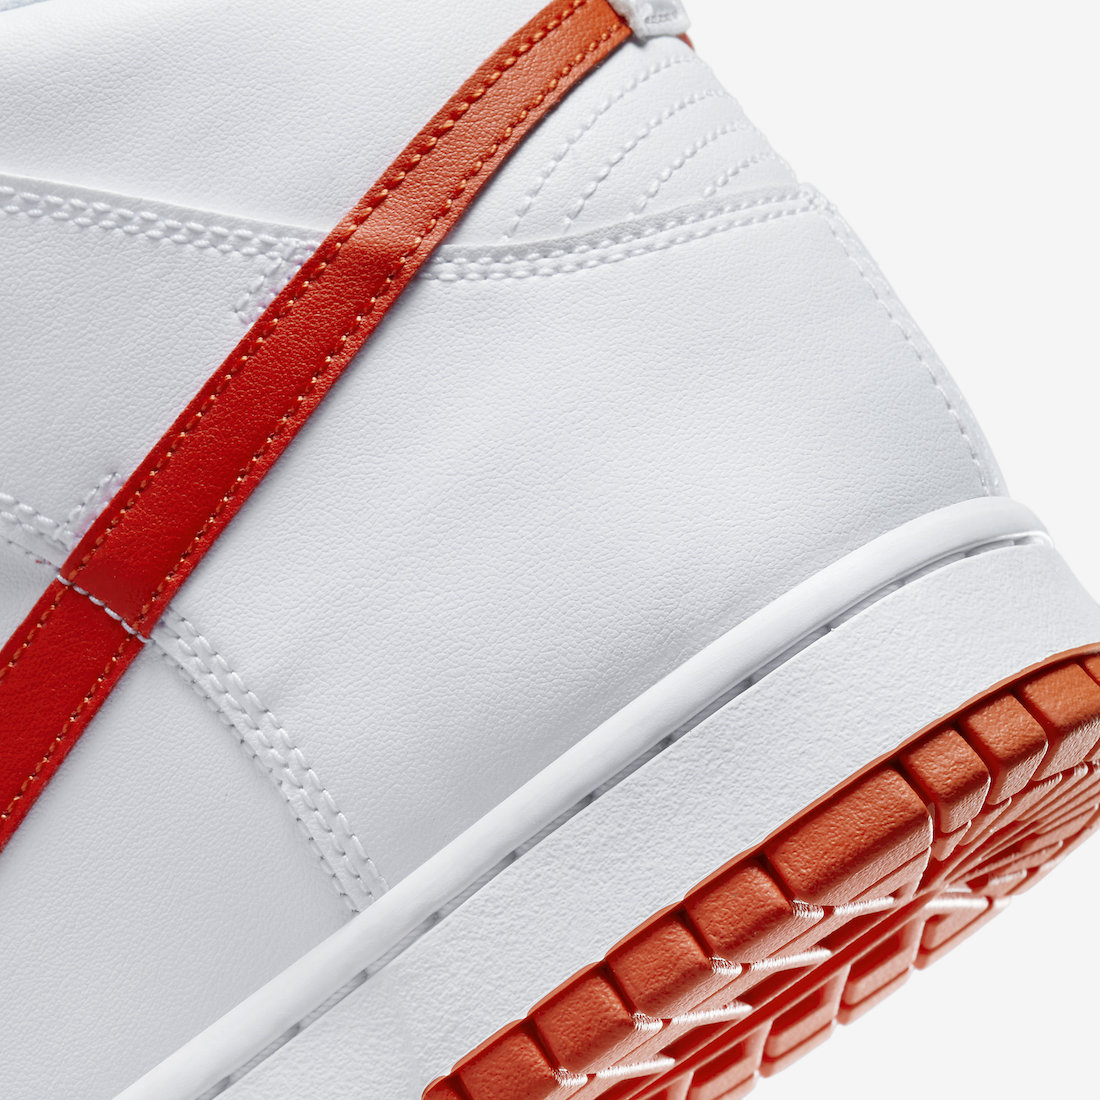 Nike Dunk High White Picante Red DV0828-100 Release Date